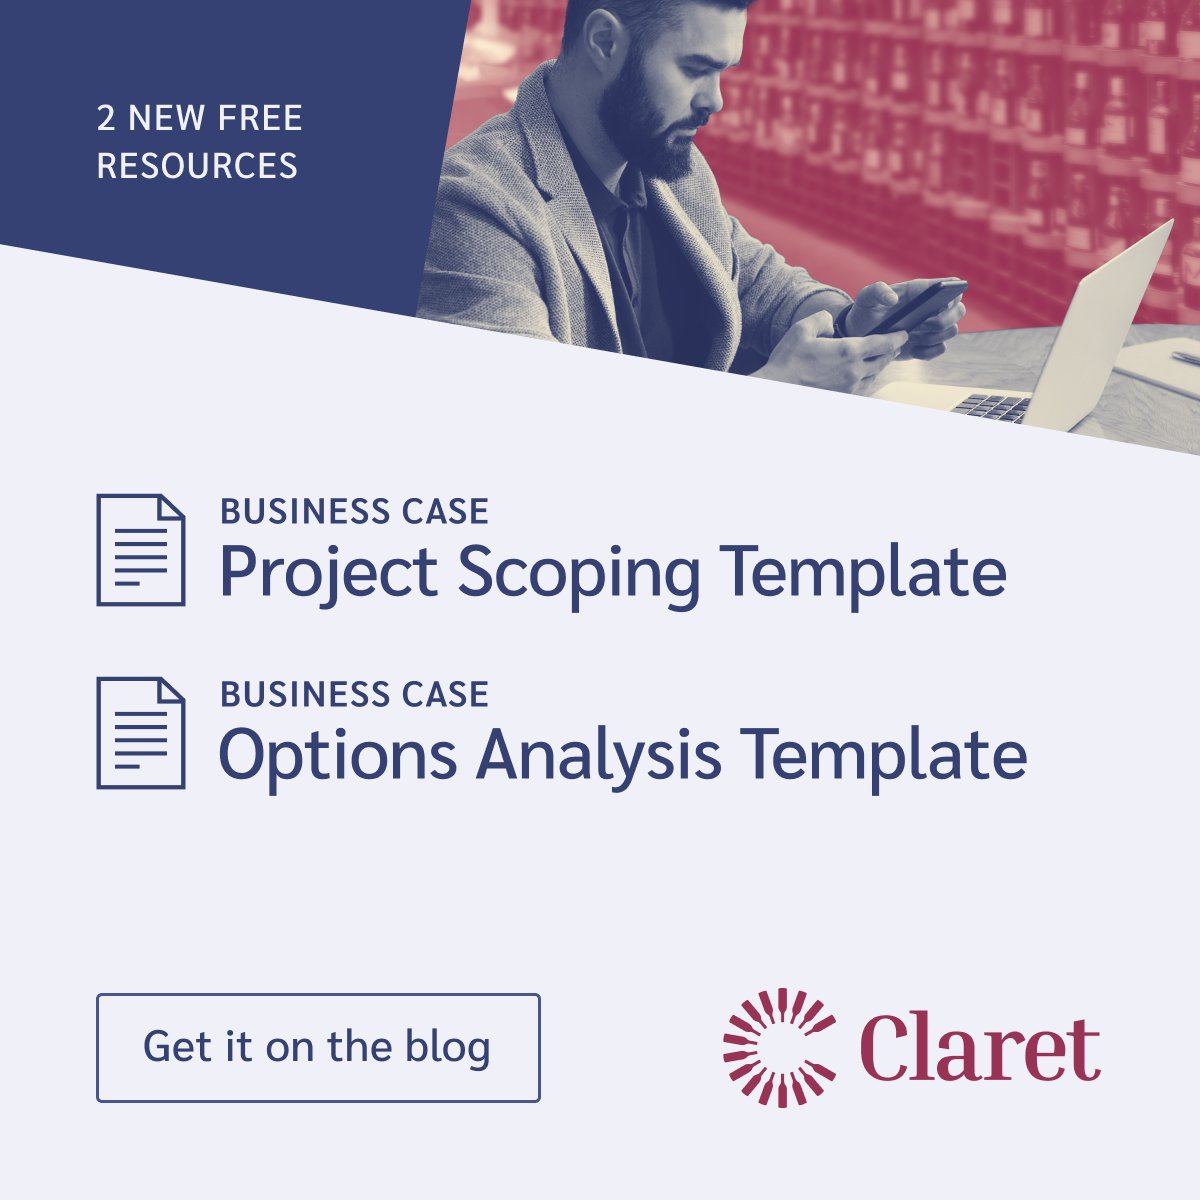 New resource alert! 🚨 We've just added two free docs to our article:
📝 Project Scoping Template and Options Analysis Template

Dive into these tools:
claret.la/3VJGpYe

#BevAlc #TechTransformation #BusinessCase #Innovation #StakeholderEngagement #ClaretSolutions